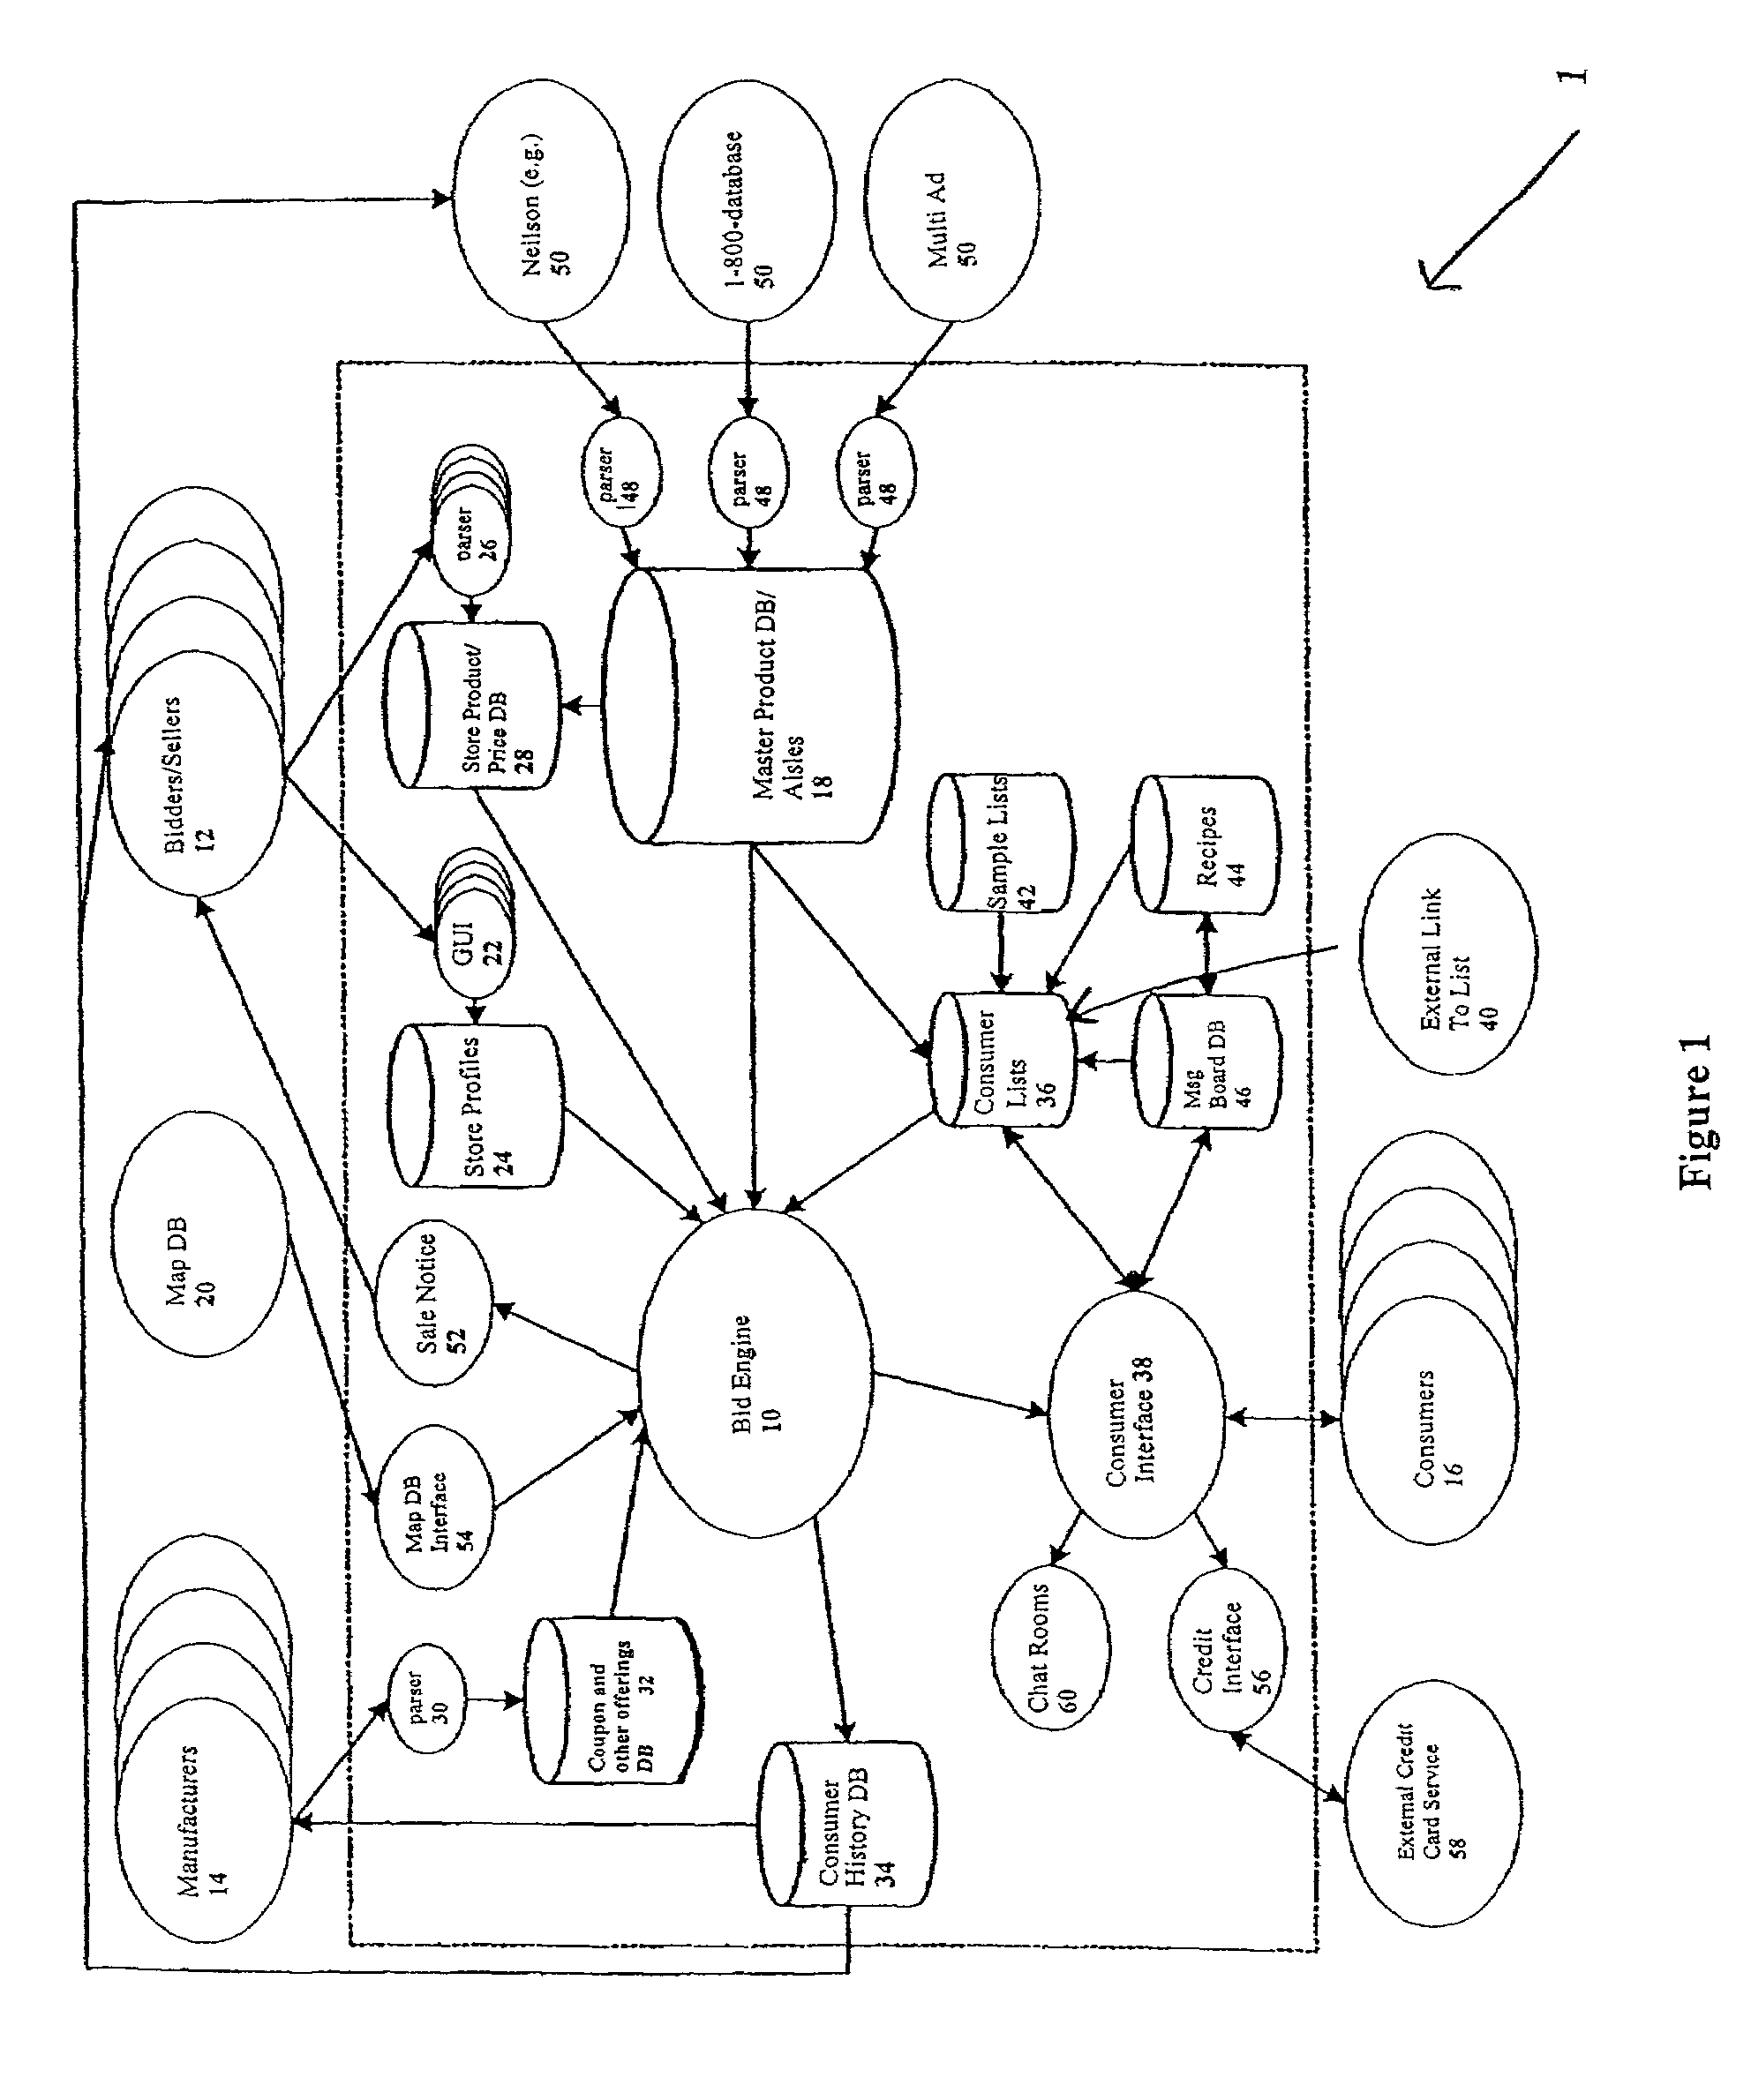 Method and system for forming a list-based value discovery network